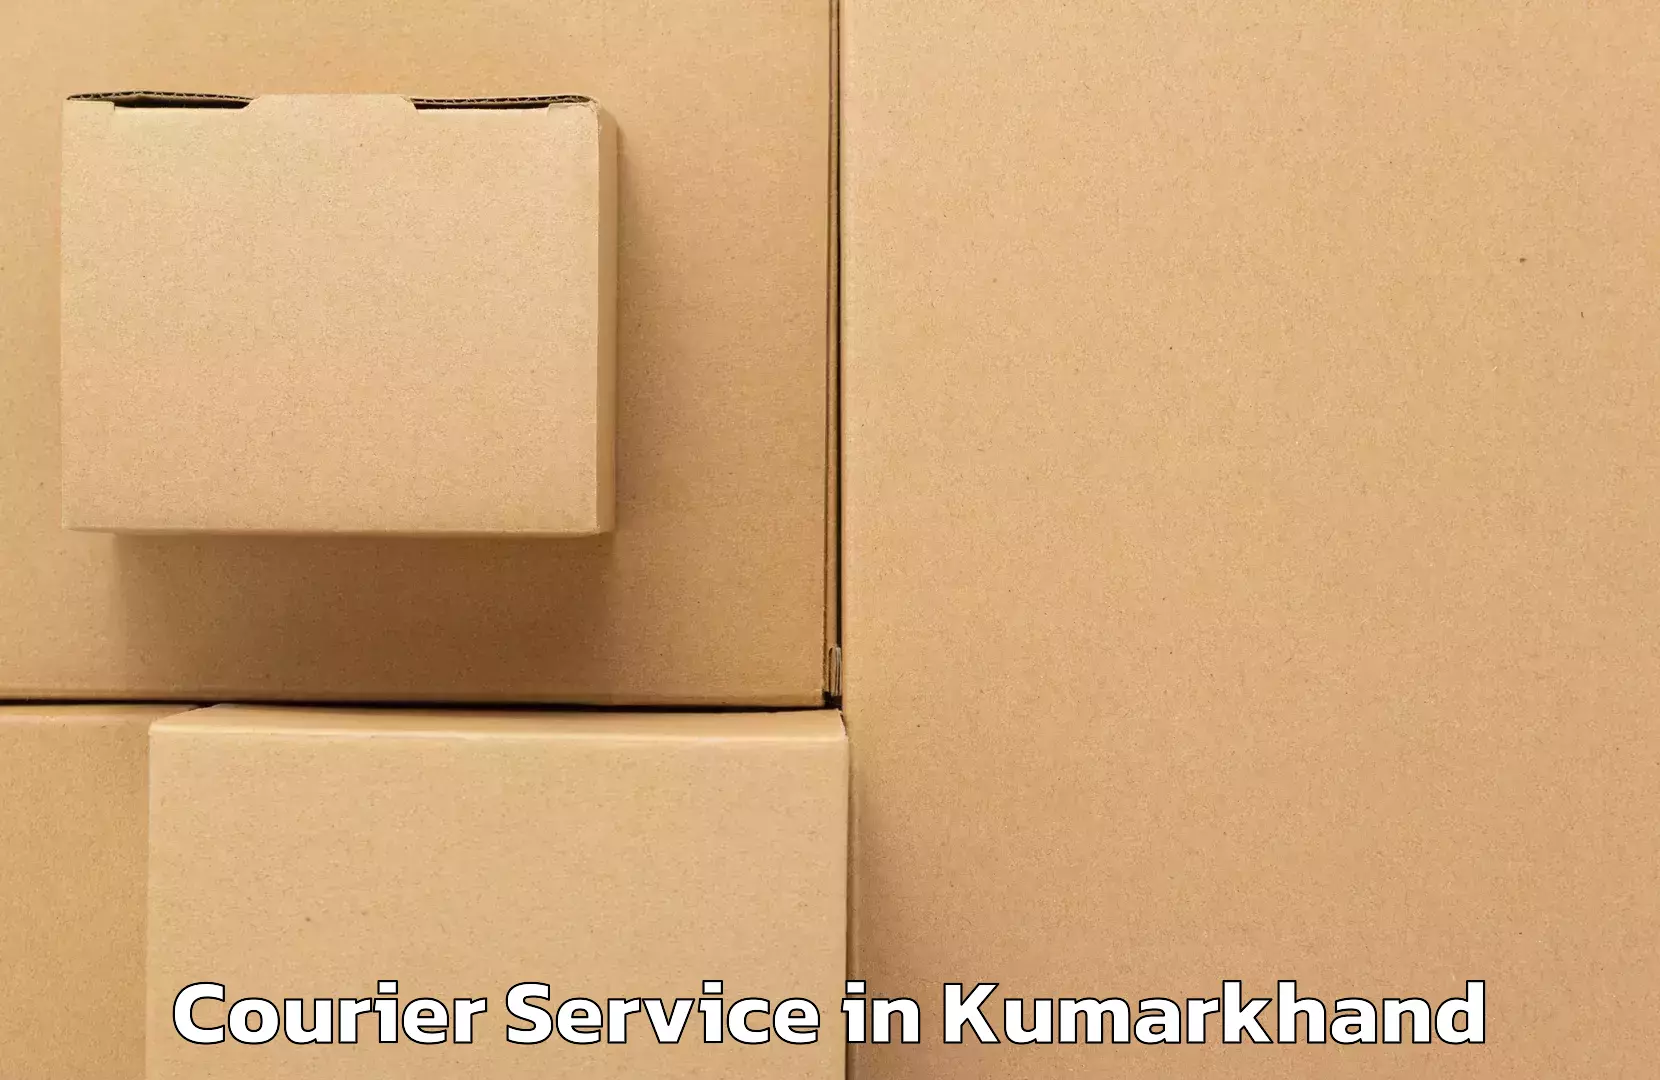 High value parcel delivery in Kumarkhand